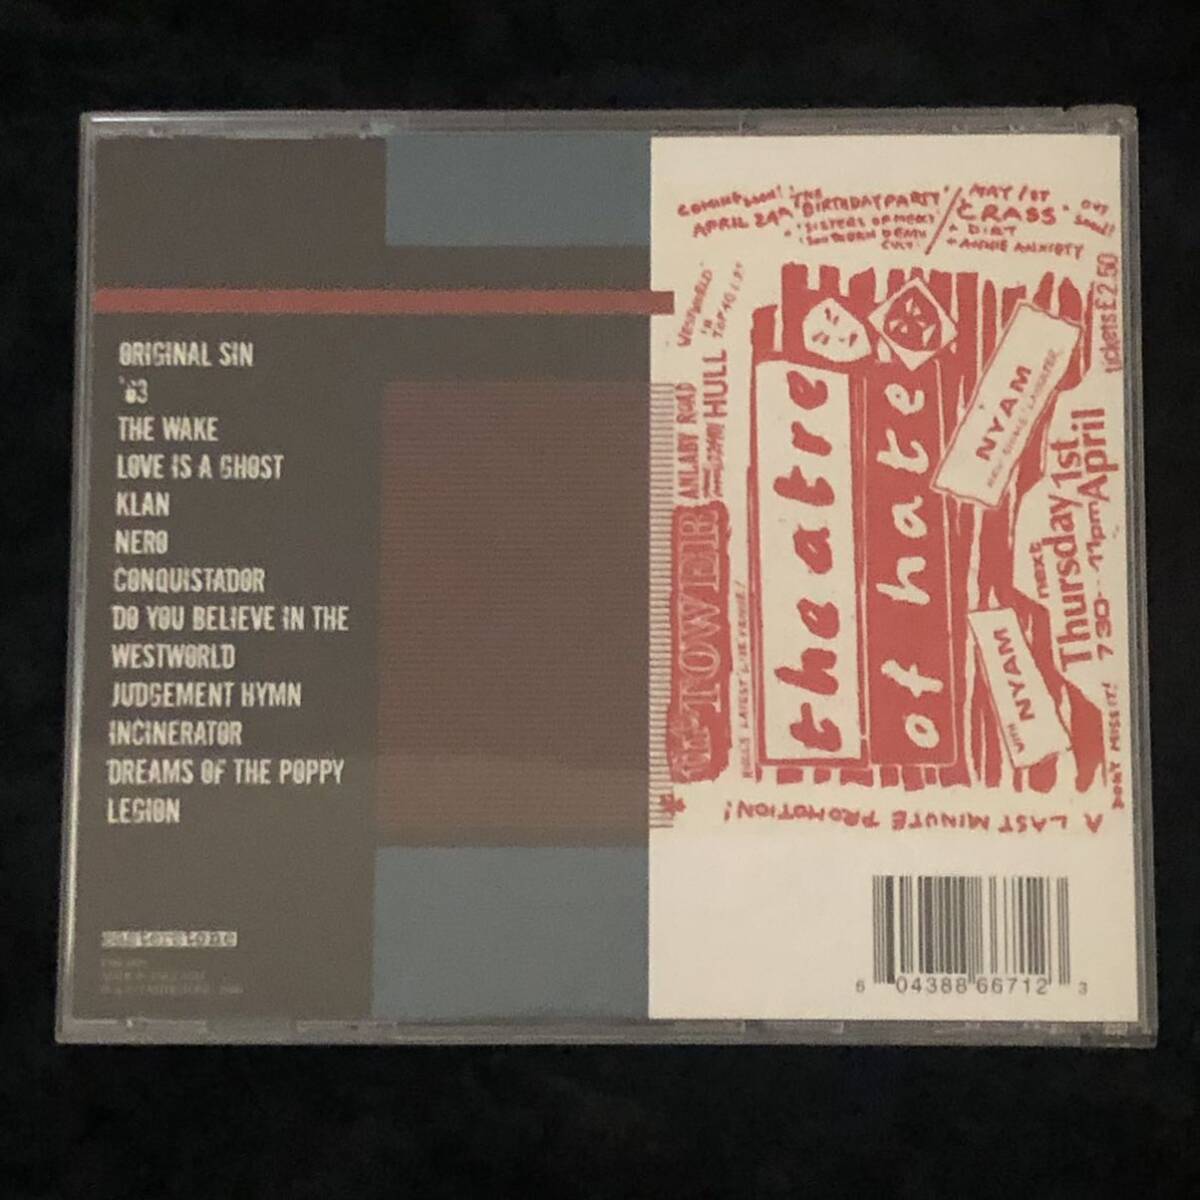 THEATRE OF HATE - LIVE IN SWEDEN (CD) THE PACK SPEAR OF DESTINY Post Punk New Wave Goth Rock Gothic_画像6